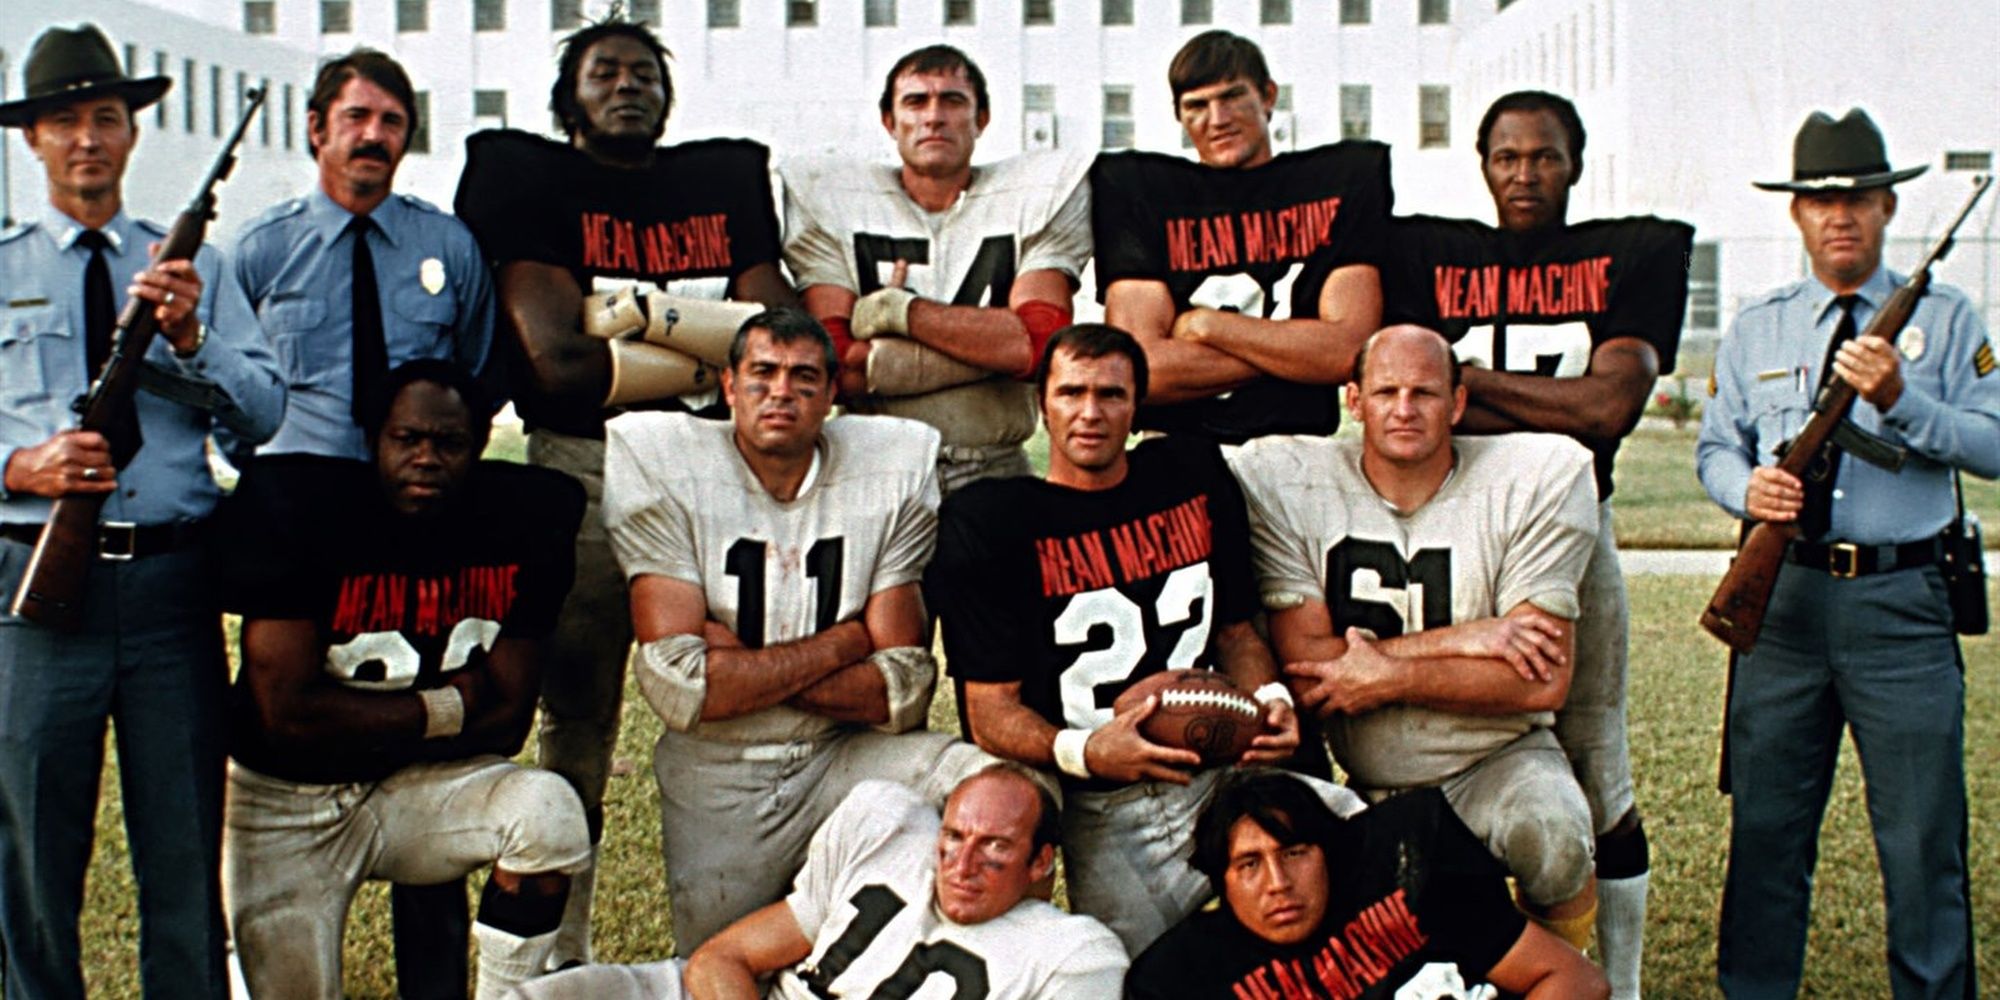 A group of football players pose in-between prison guards